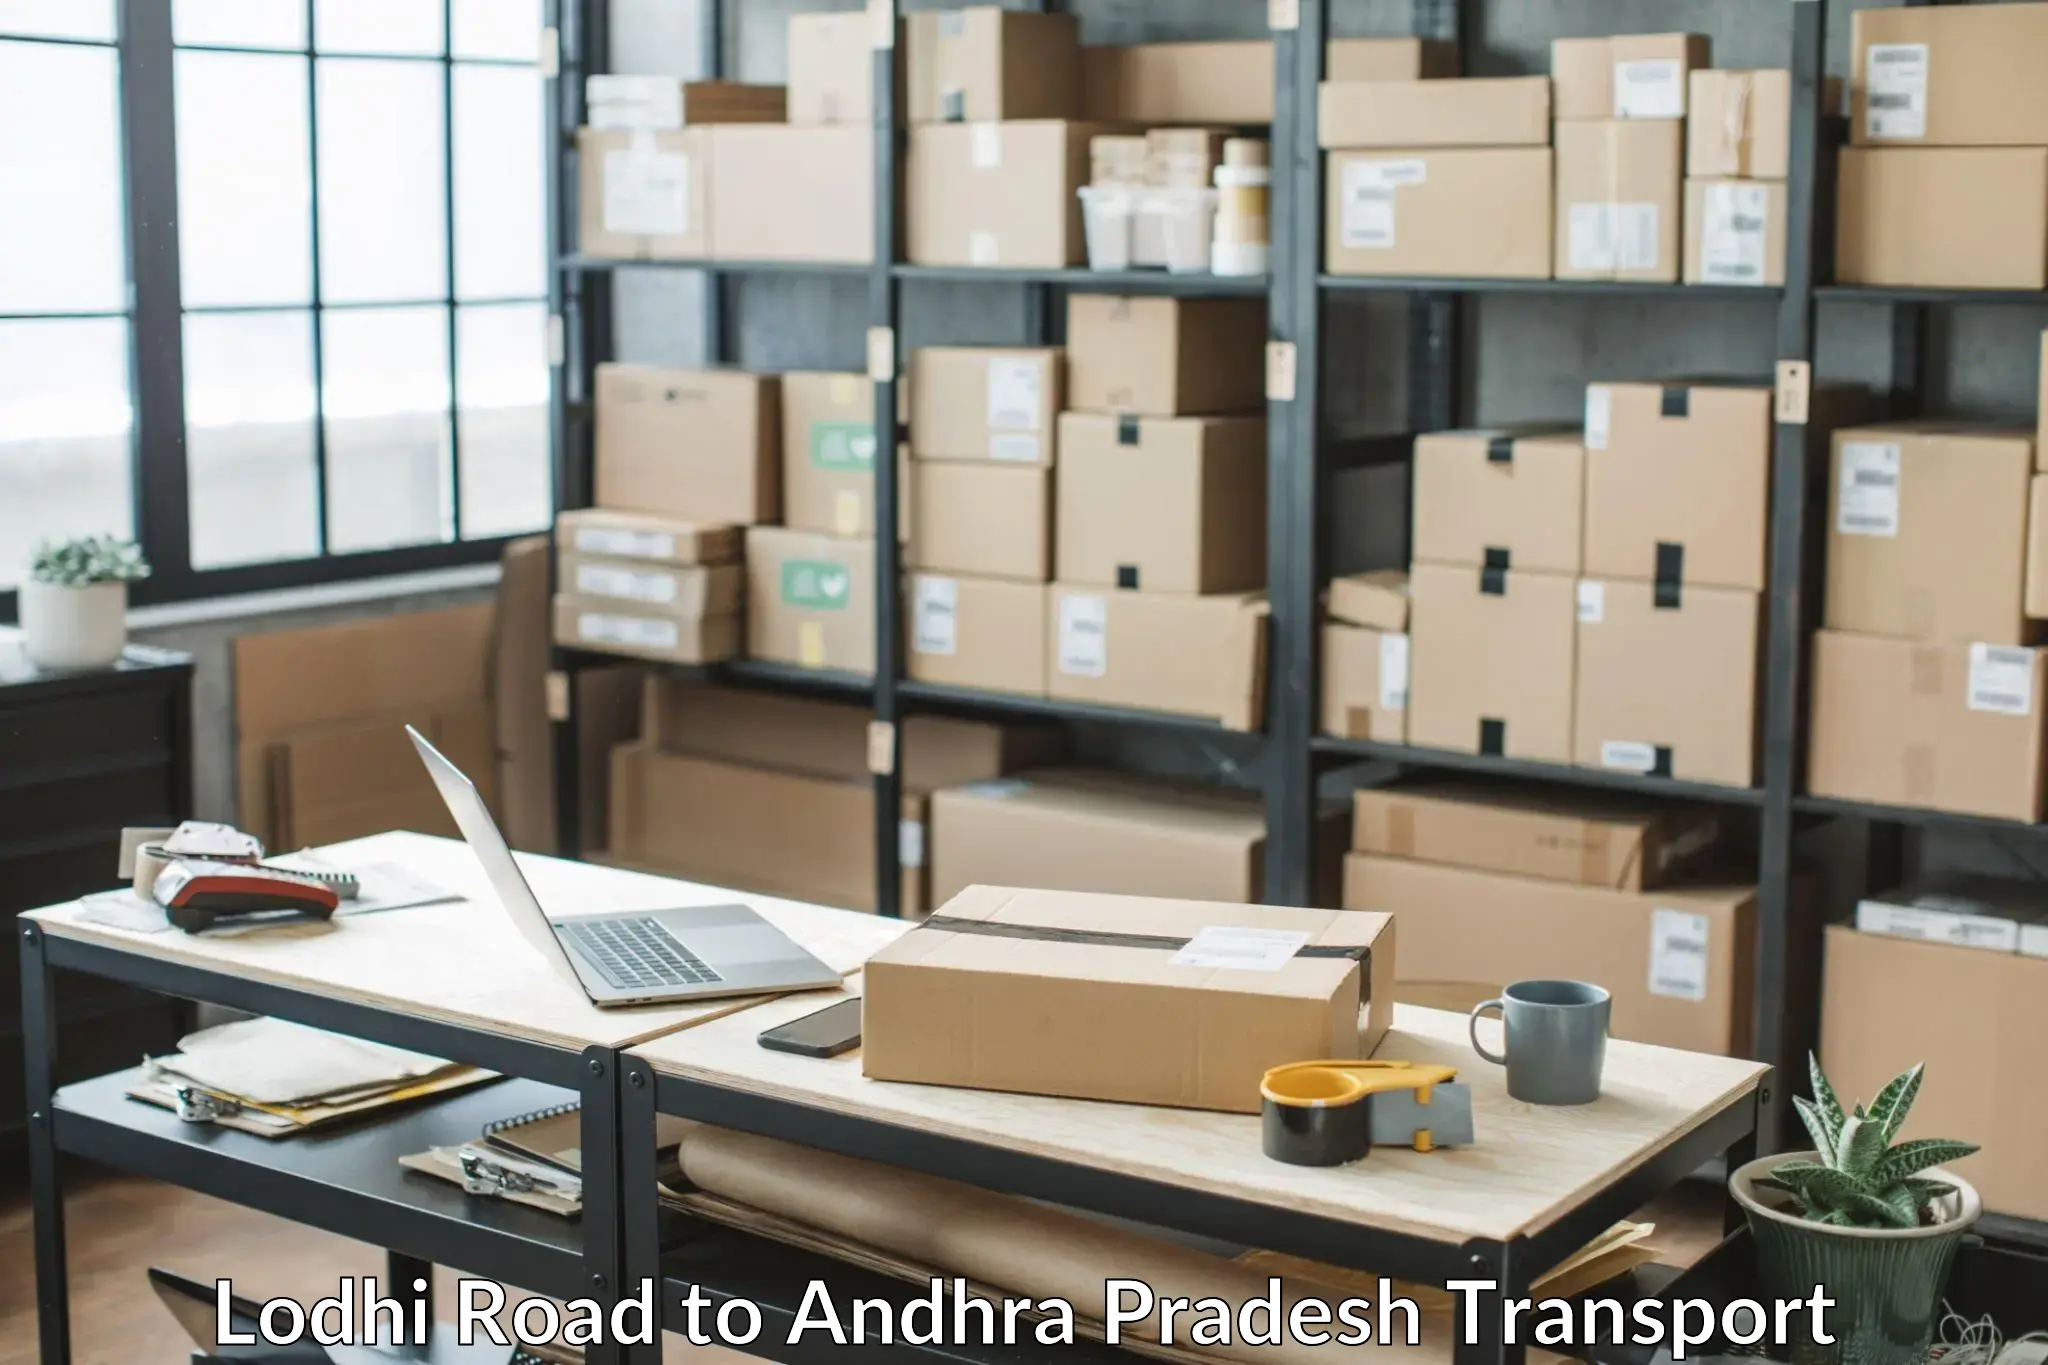 Inland transportation services Lodhi Road to Tripuranthakam